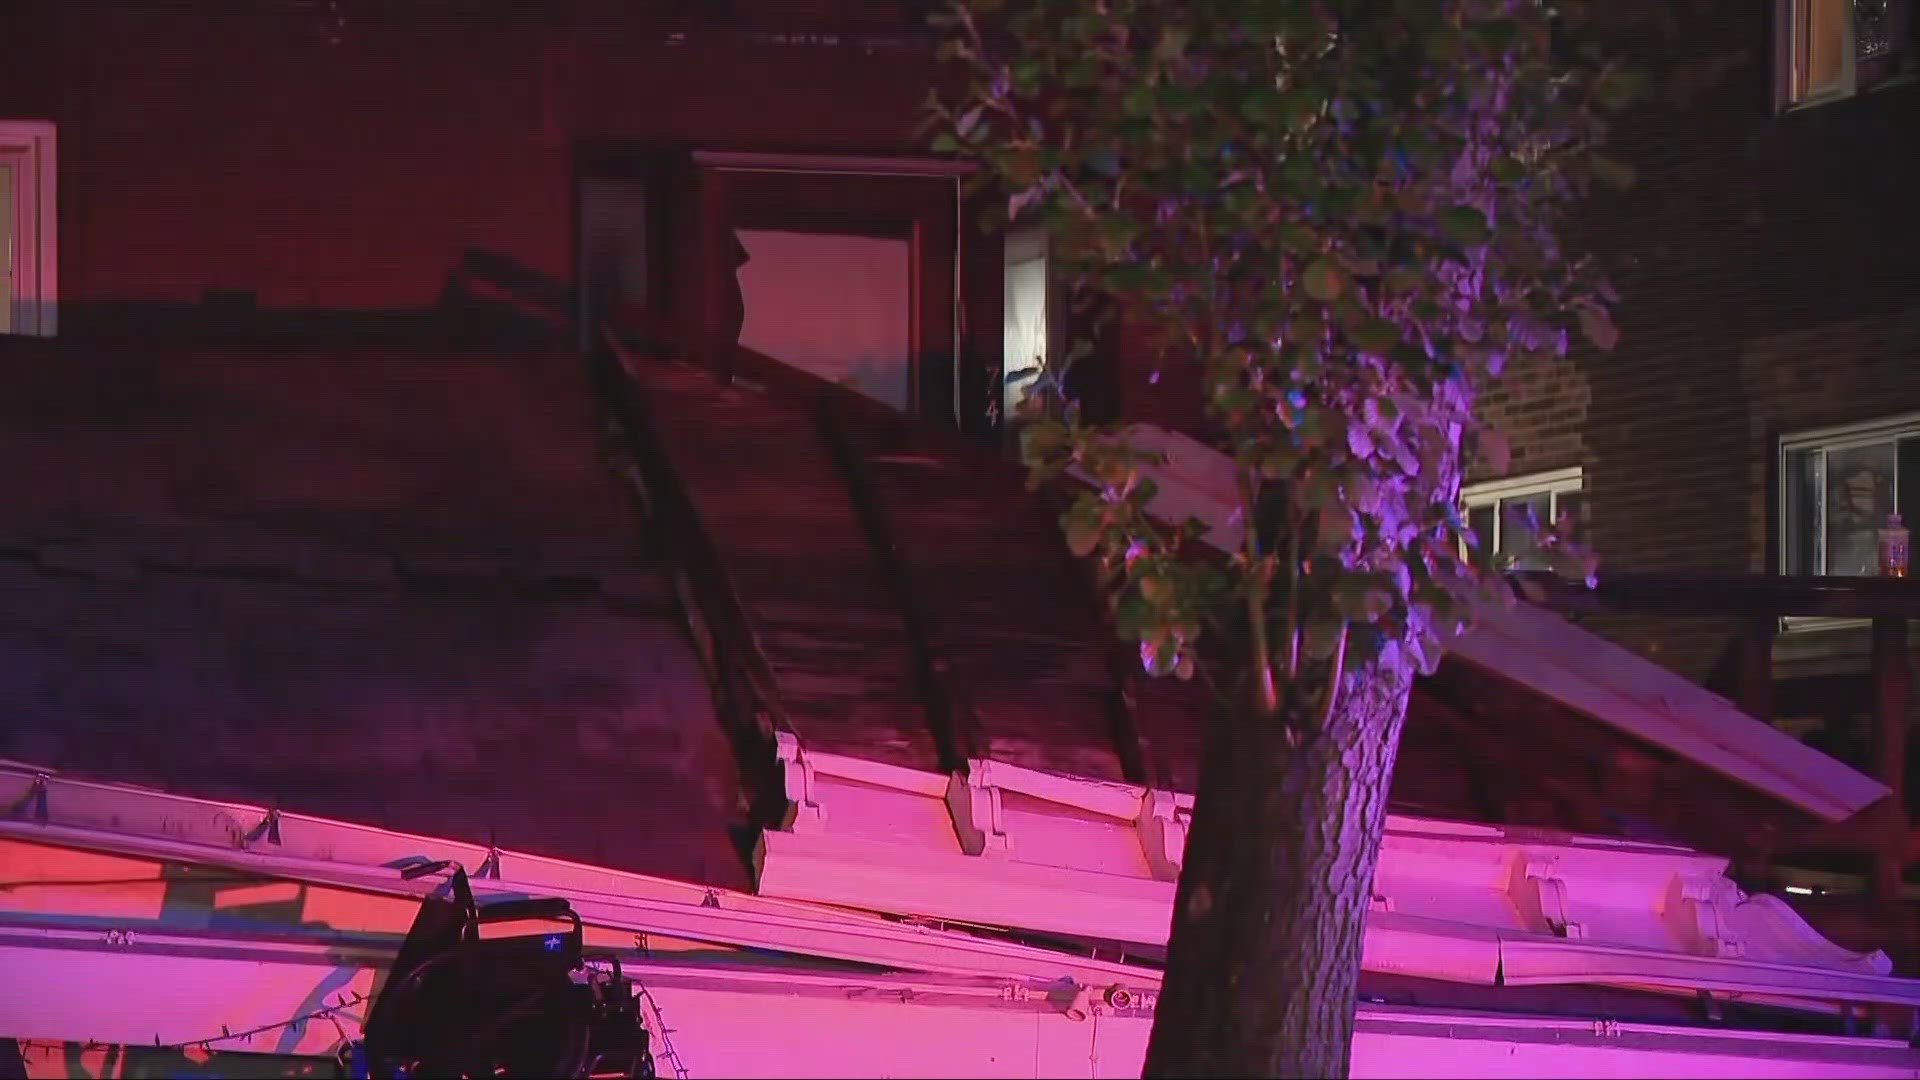 Officers responded to a call of a roof collapsing at a house in the 60 block of East 13th Avenue around 7:40 p.m.